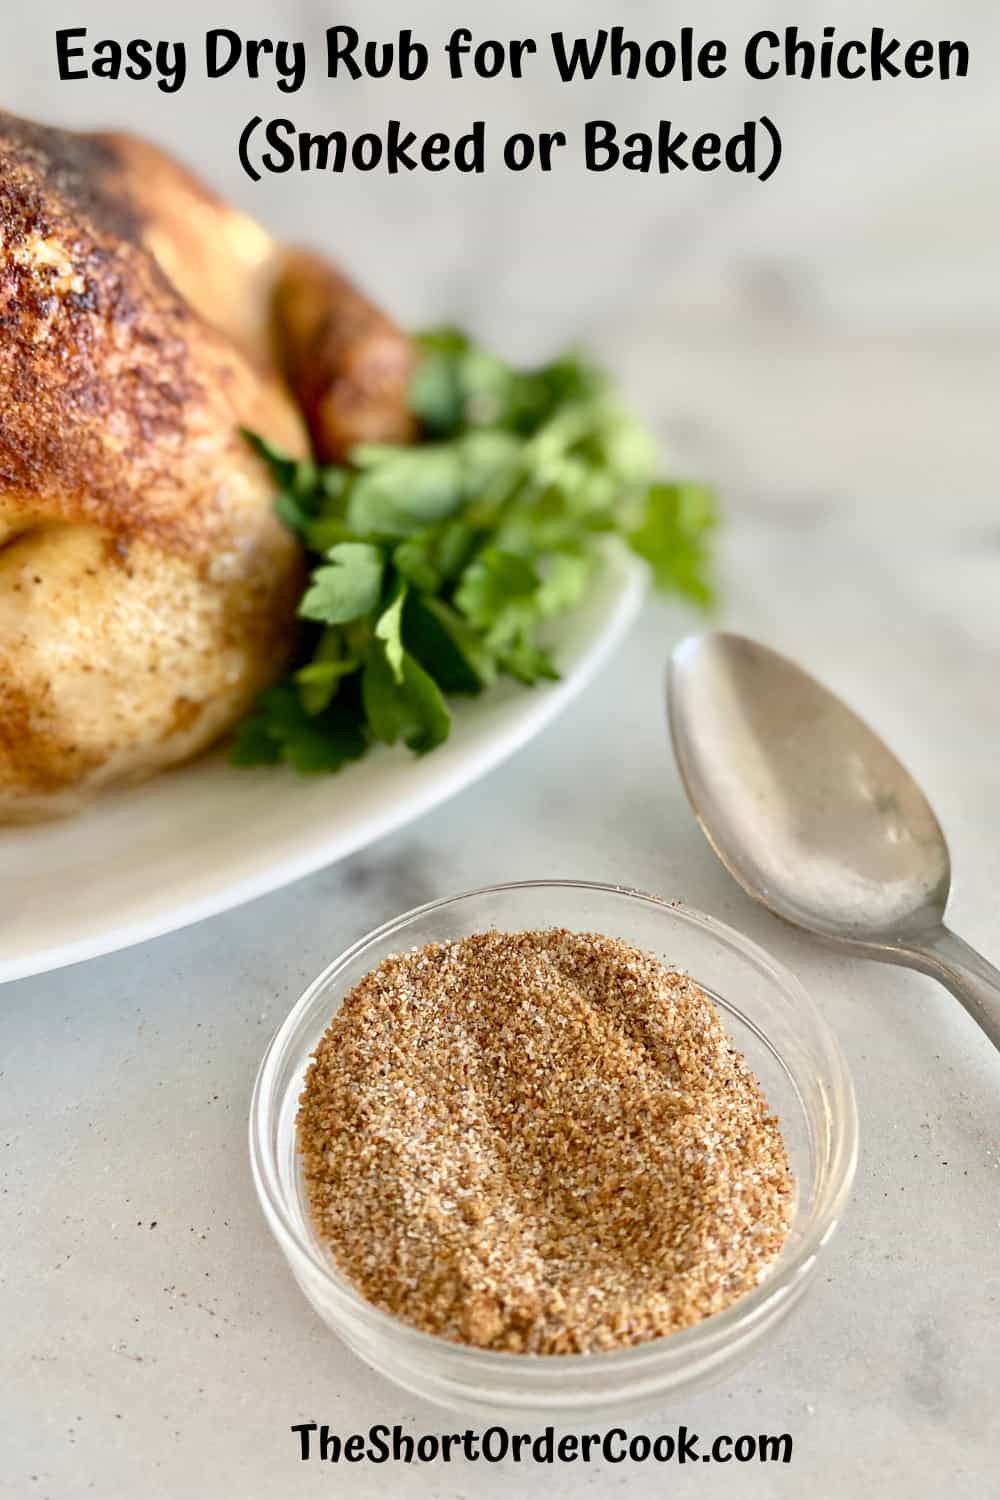 bowl of dry rub next to a baked chicken on a platter with fresh parsley